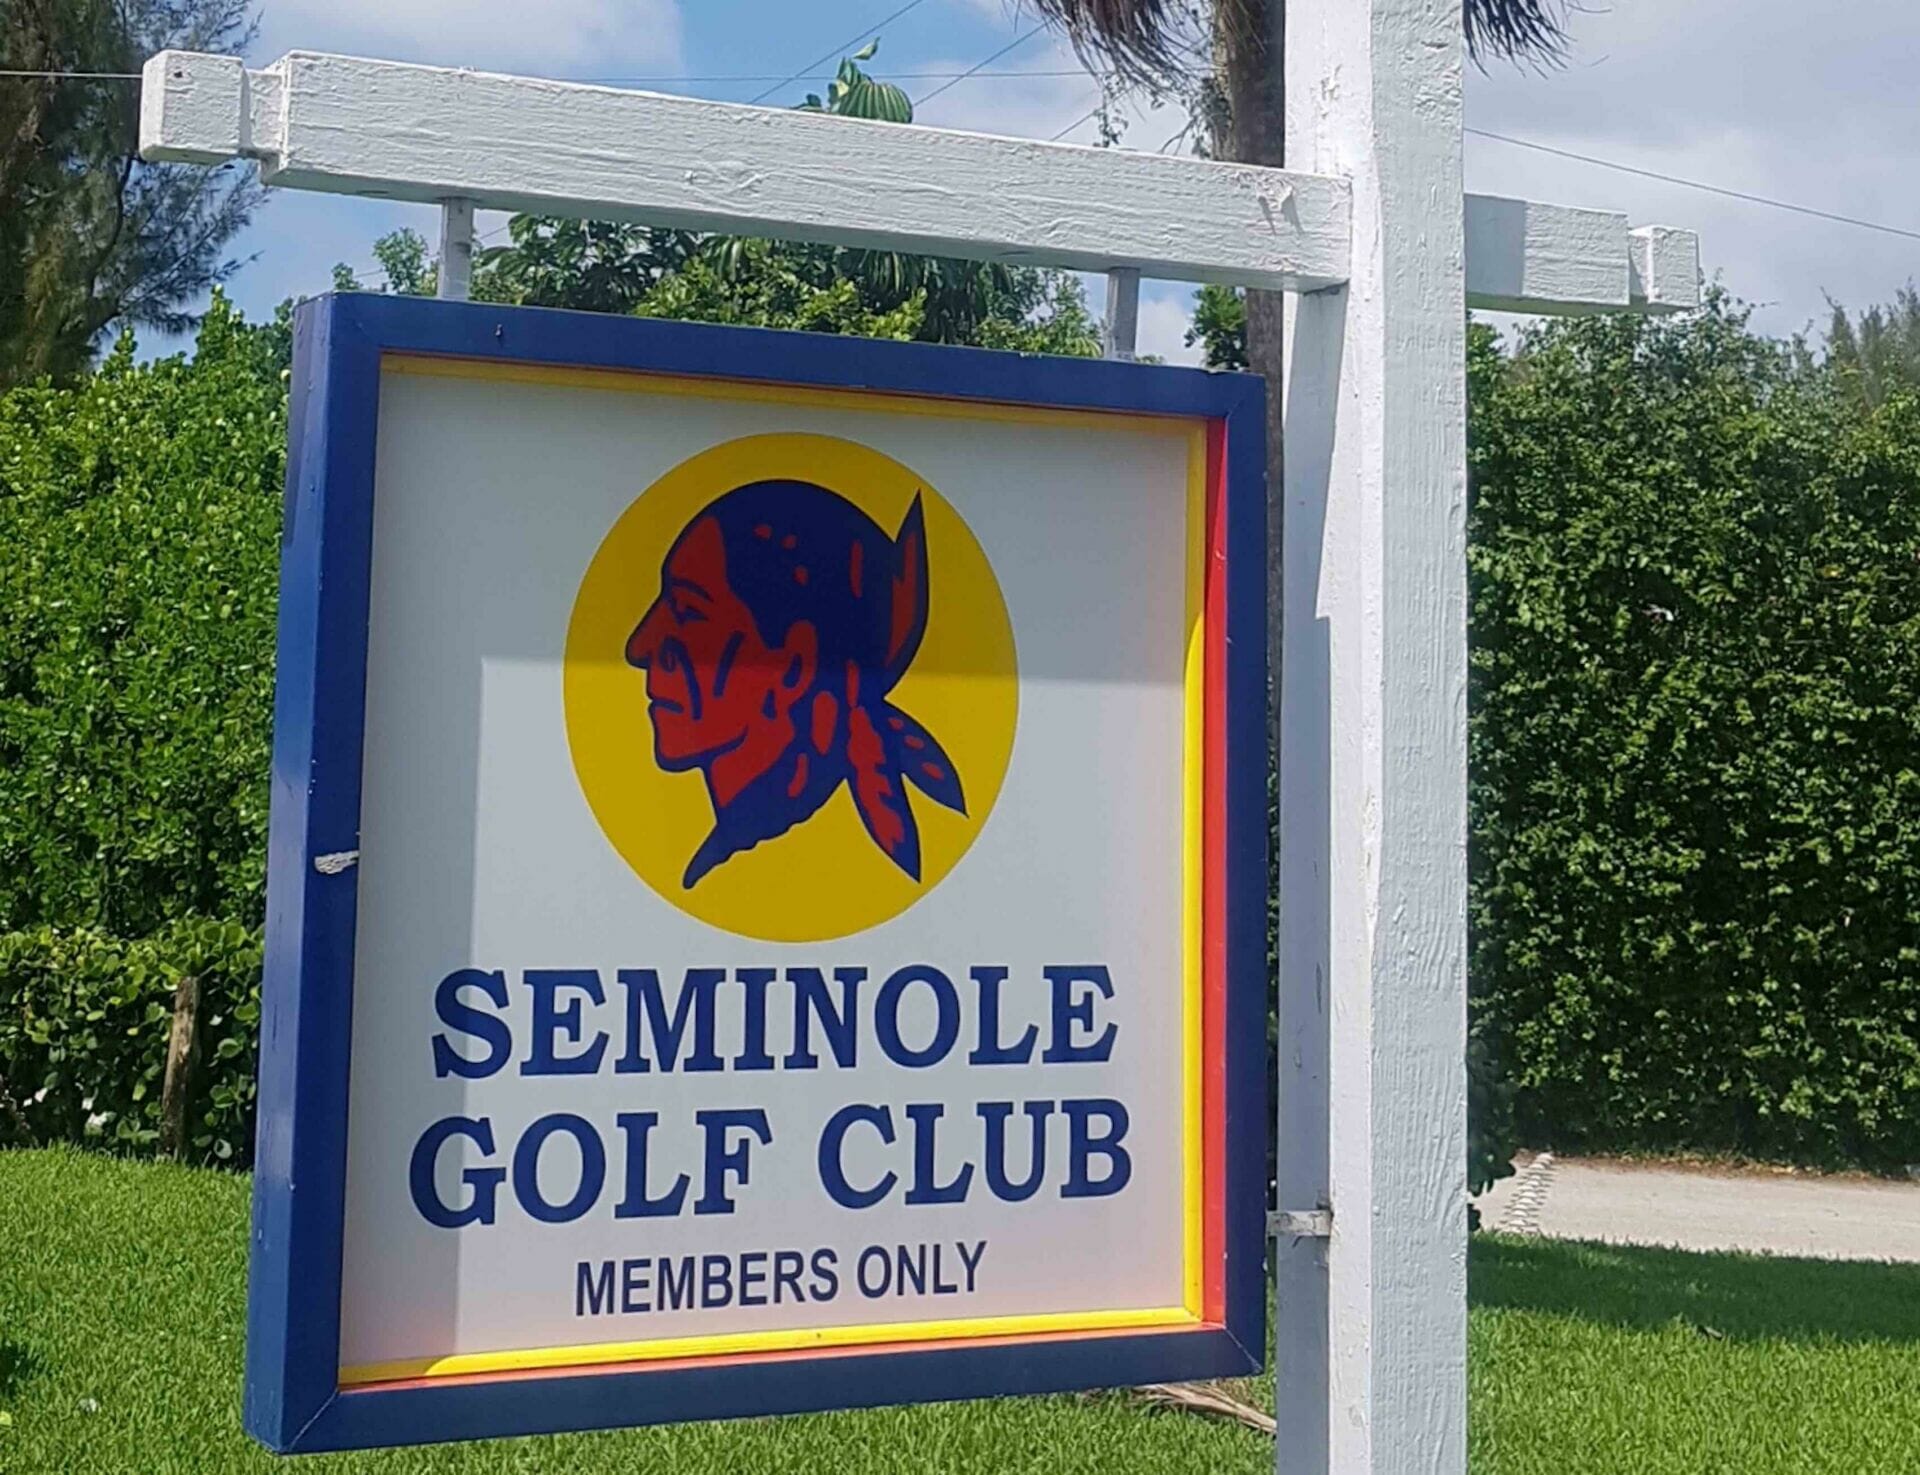 McIlroy believes ‘Sunday at Seminole’ can showcase all that is good in golf